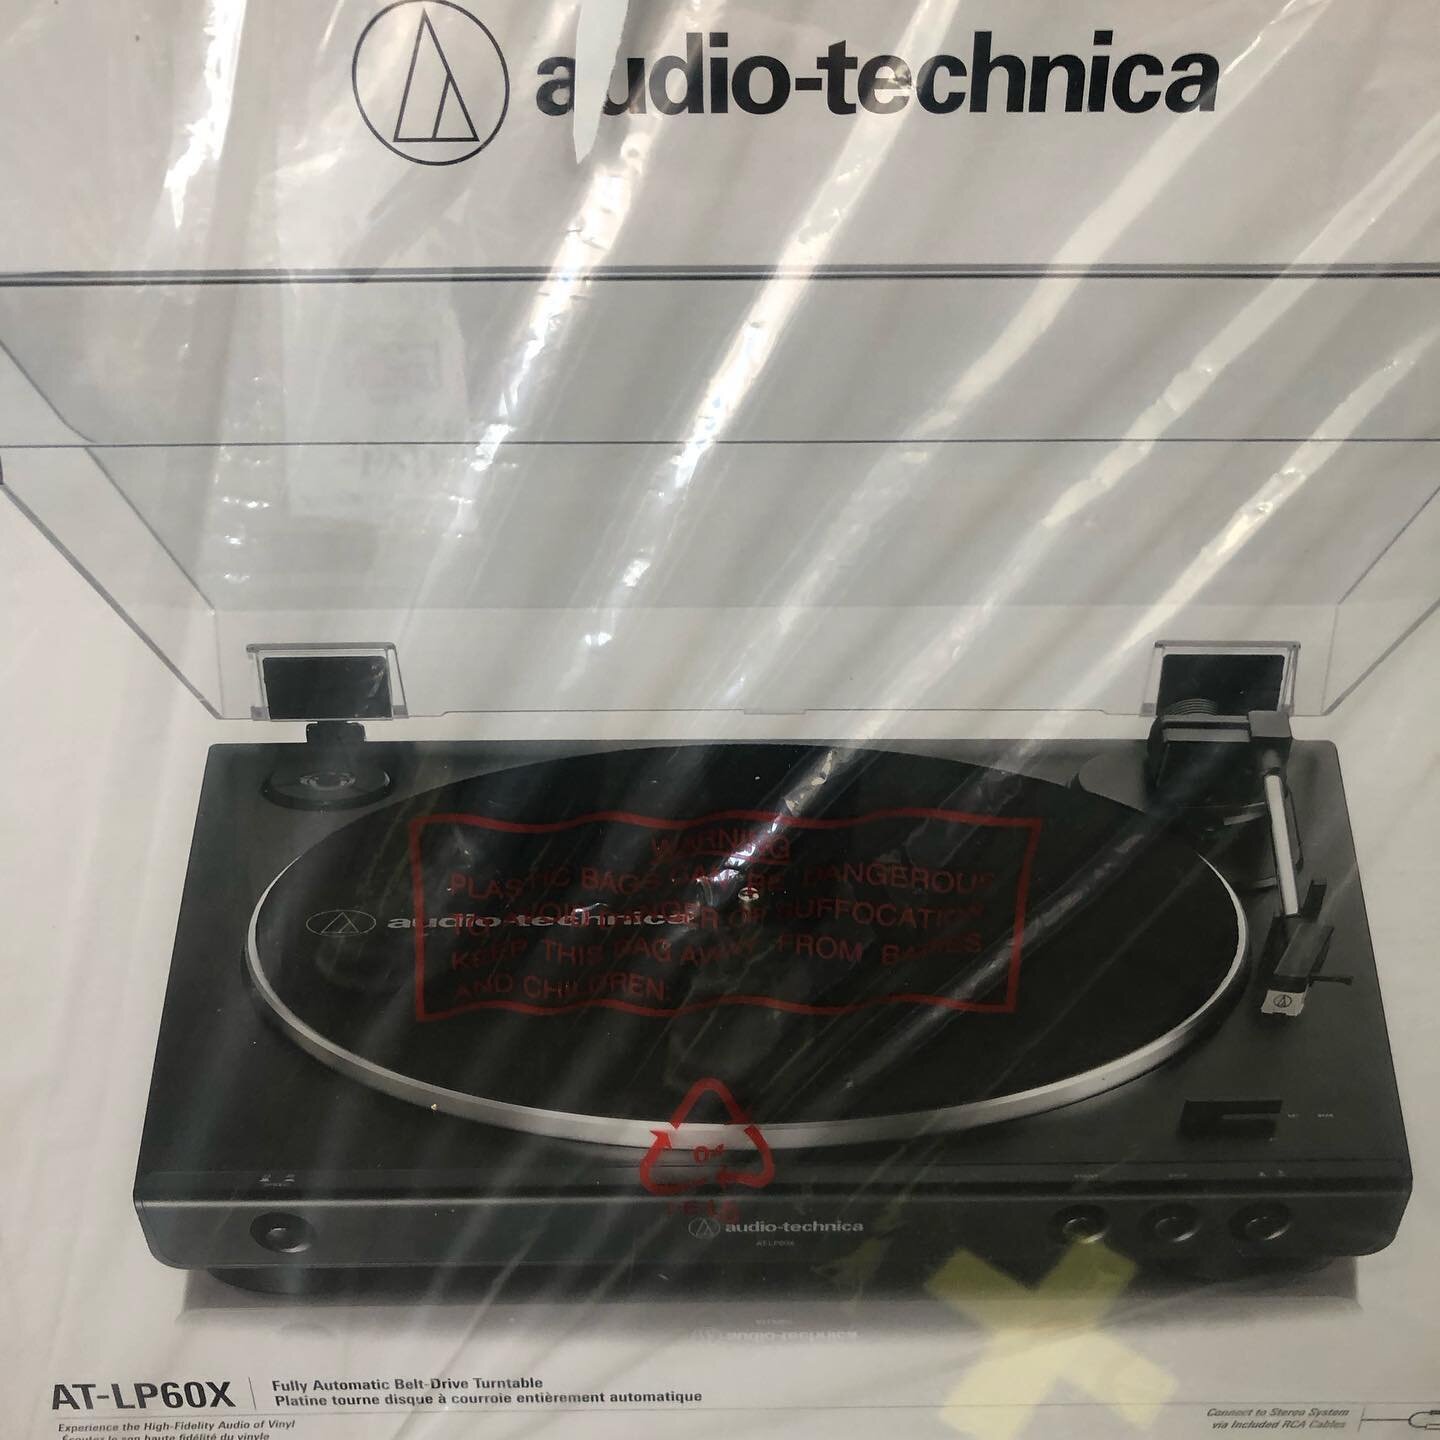 This weekend only: buy a brand new Audio-technica LP-60x turntable ($129.99) and get a FREE Vinyl Styl Ultimate Care Kit (a free $30 value!!!). Have a loyalty account? This purchase automatically gives you $5 off your next purchase and you&rsquo;re w